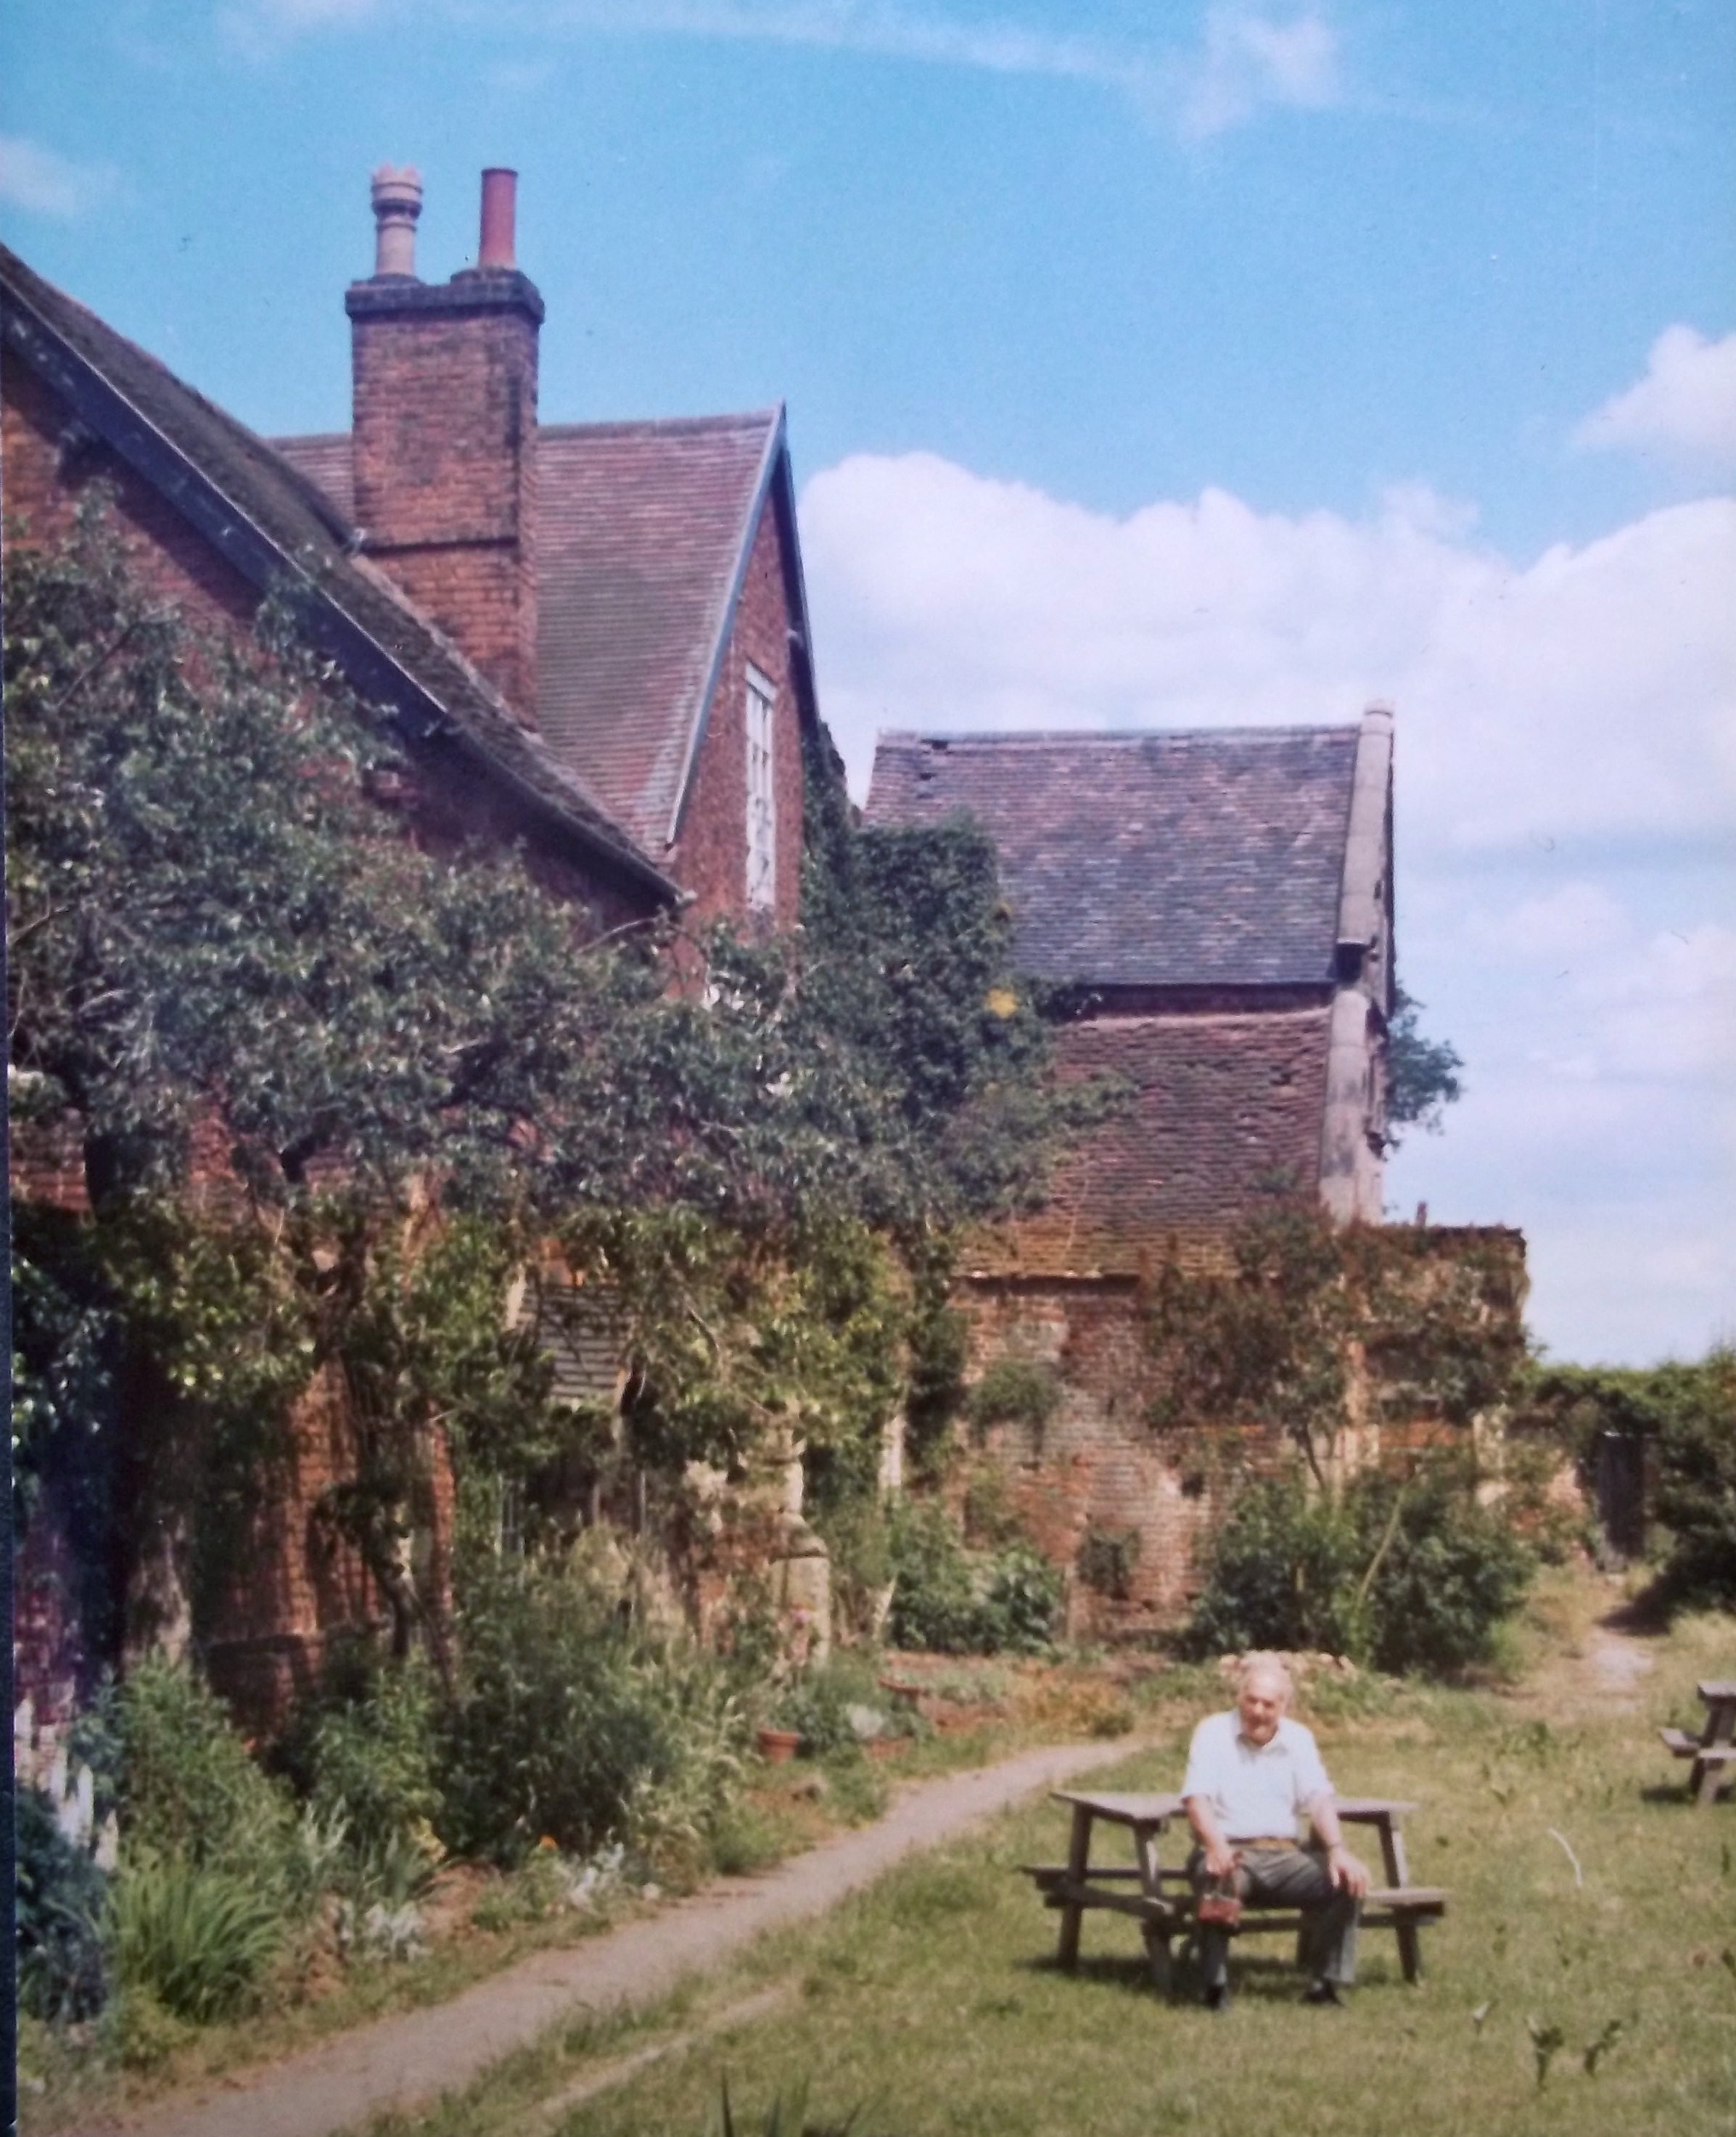 My dad in the garden of the manor house, Hamstall Ridware. C.1982.